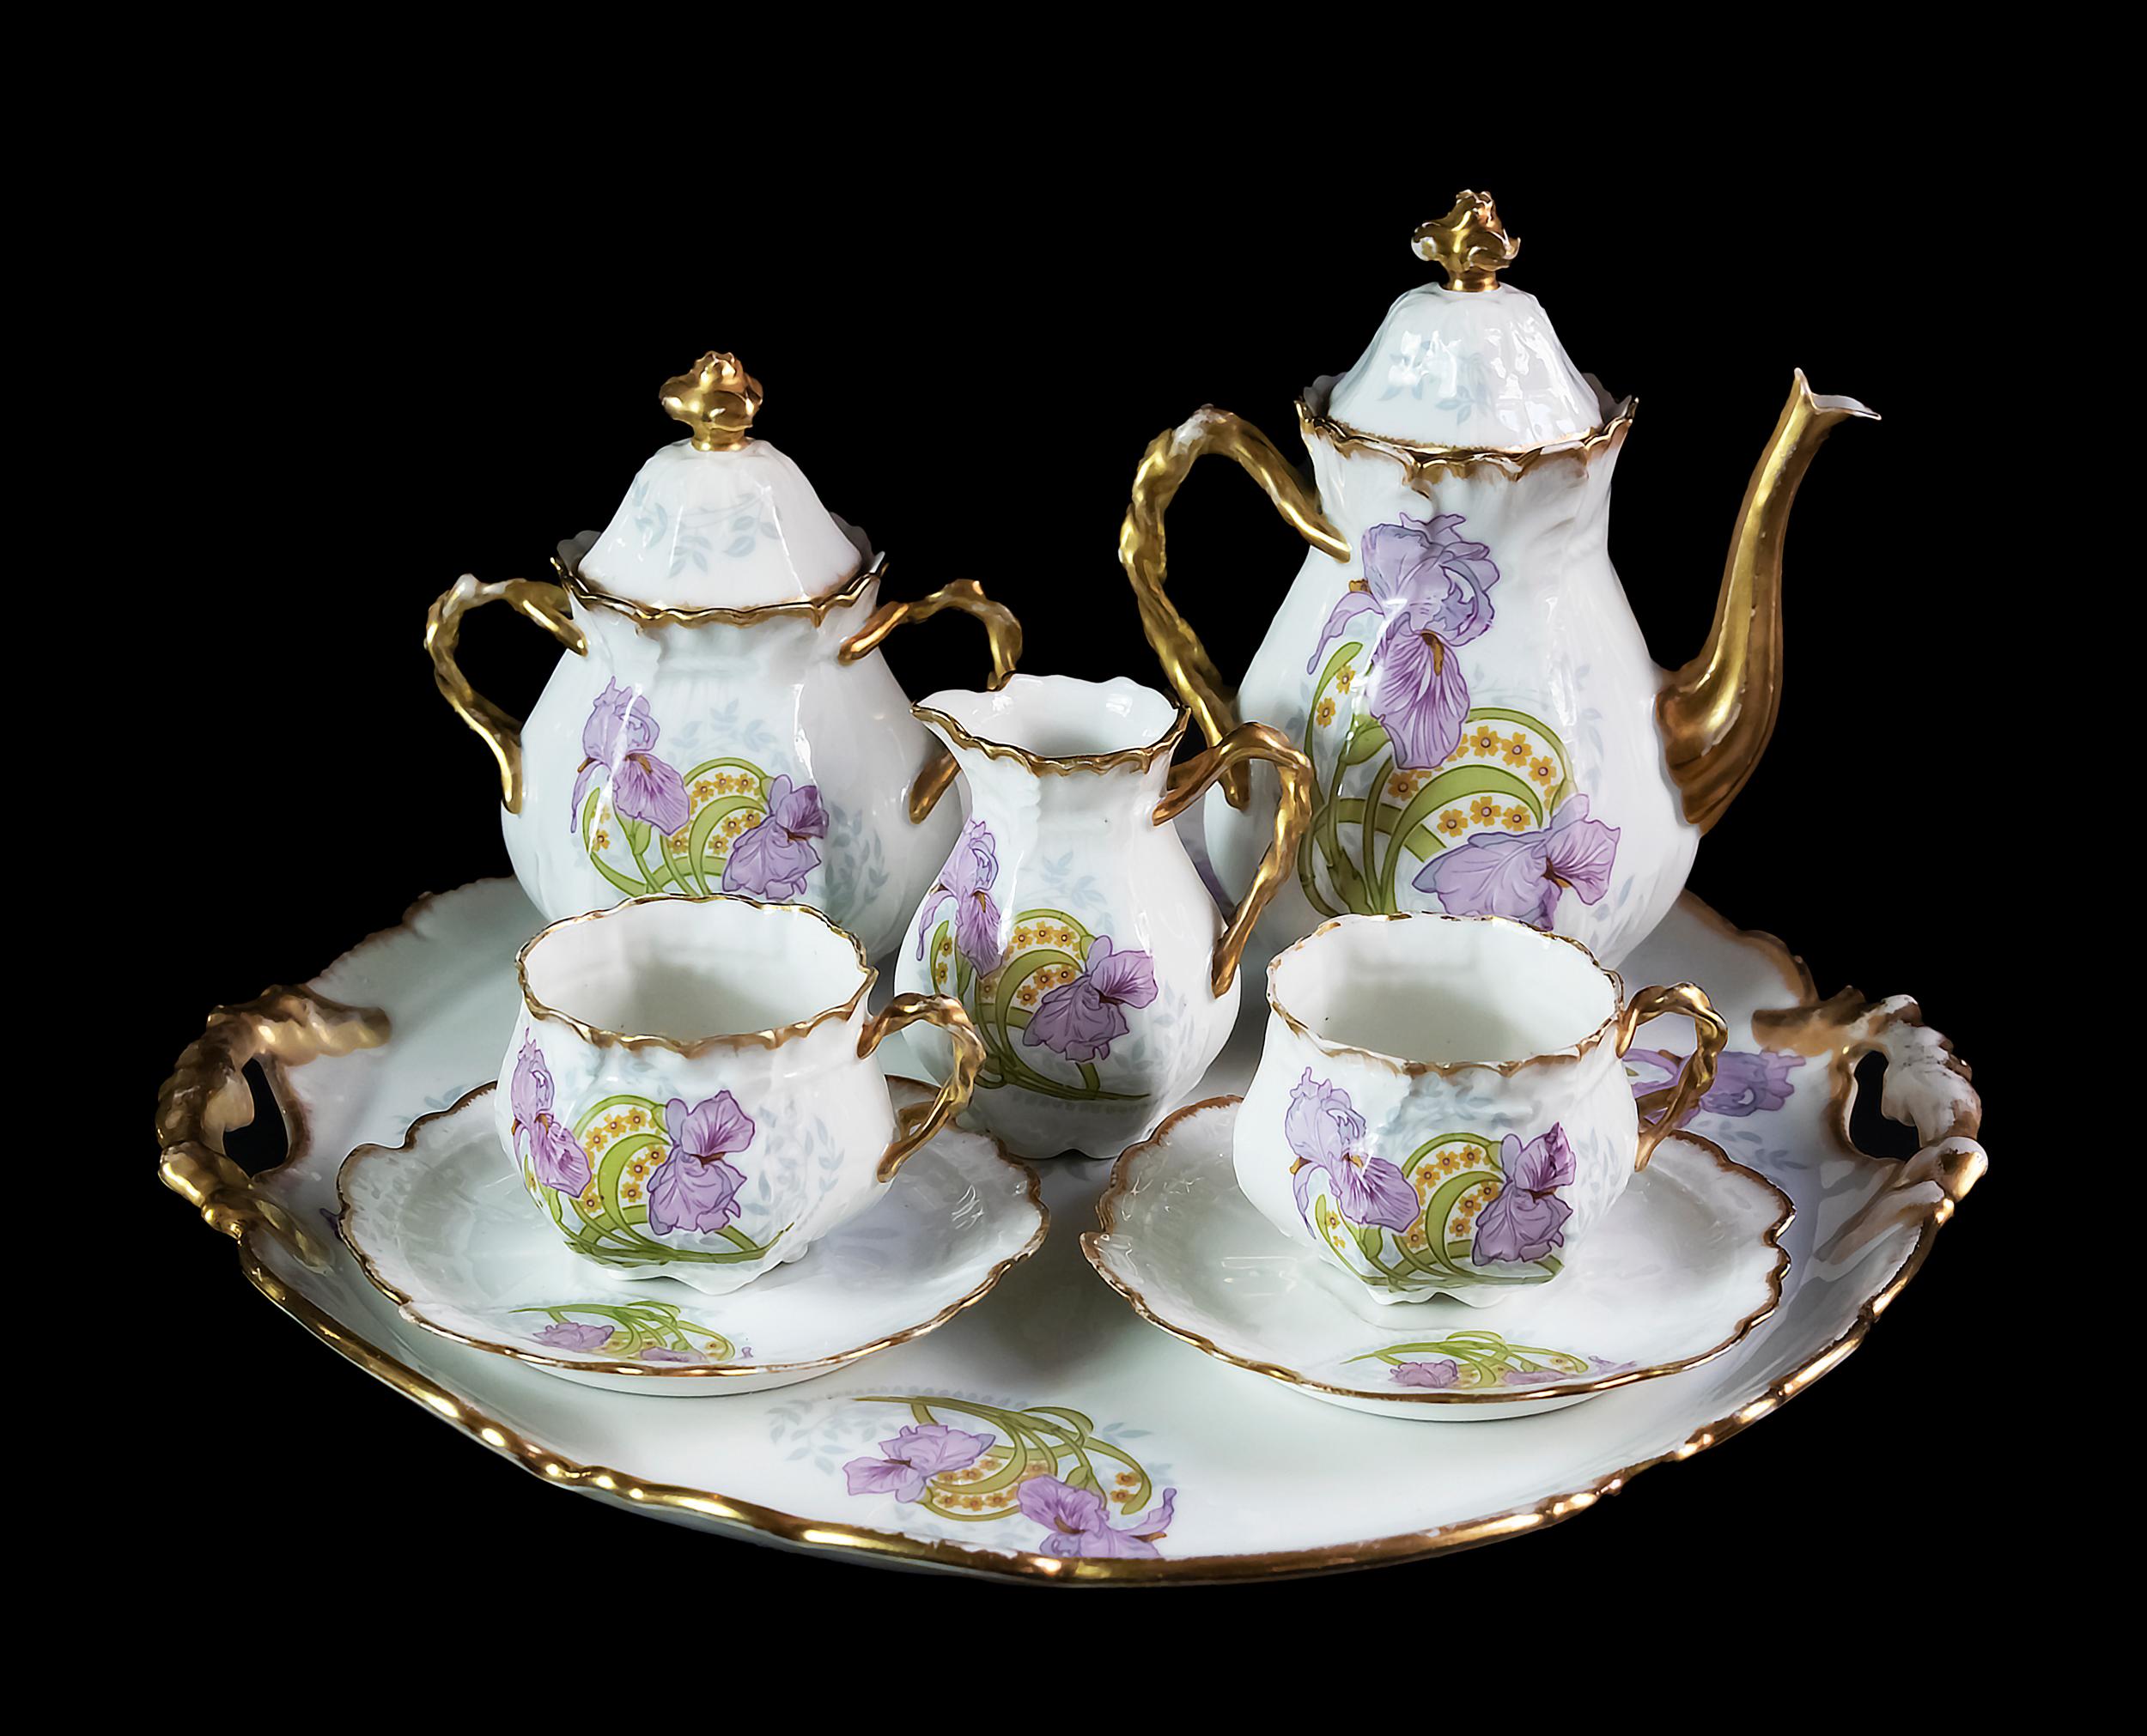 French porcelain coffee set for 2 persons.
Including coffee pot, milk jug, sugar bowl, round tray and 2 cups with saucers.
Porcelain is hand crafted with iris flower decor.
Dimensions: coffee pot: H 18 cm, milk jug H 9 cm, sugar bowl H 14 cm, round